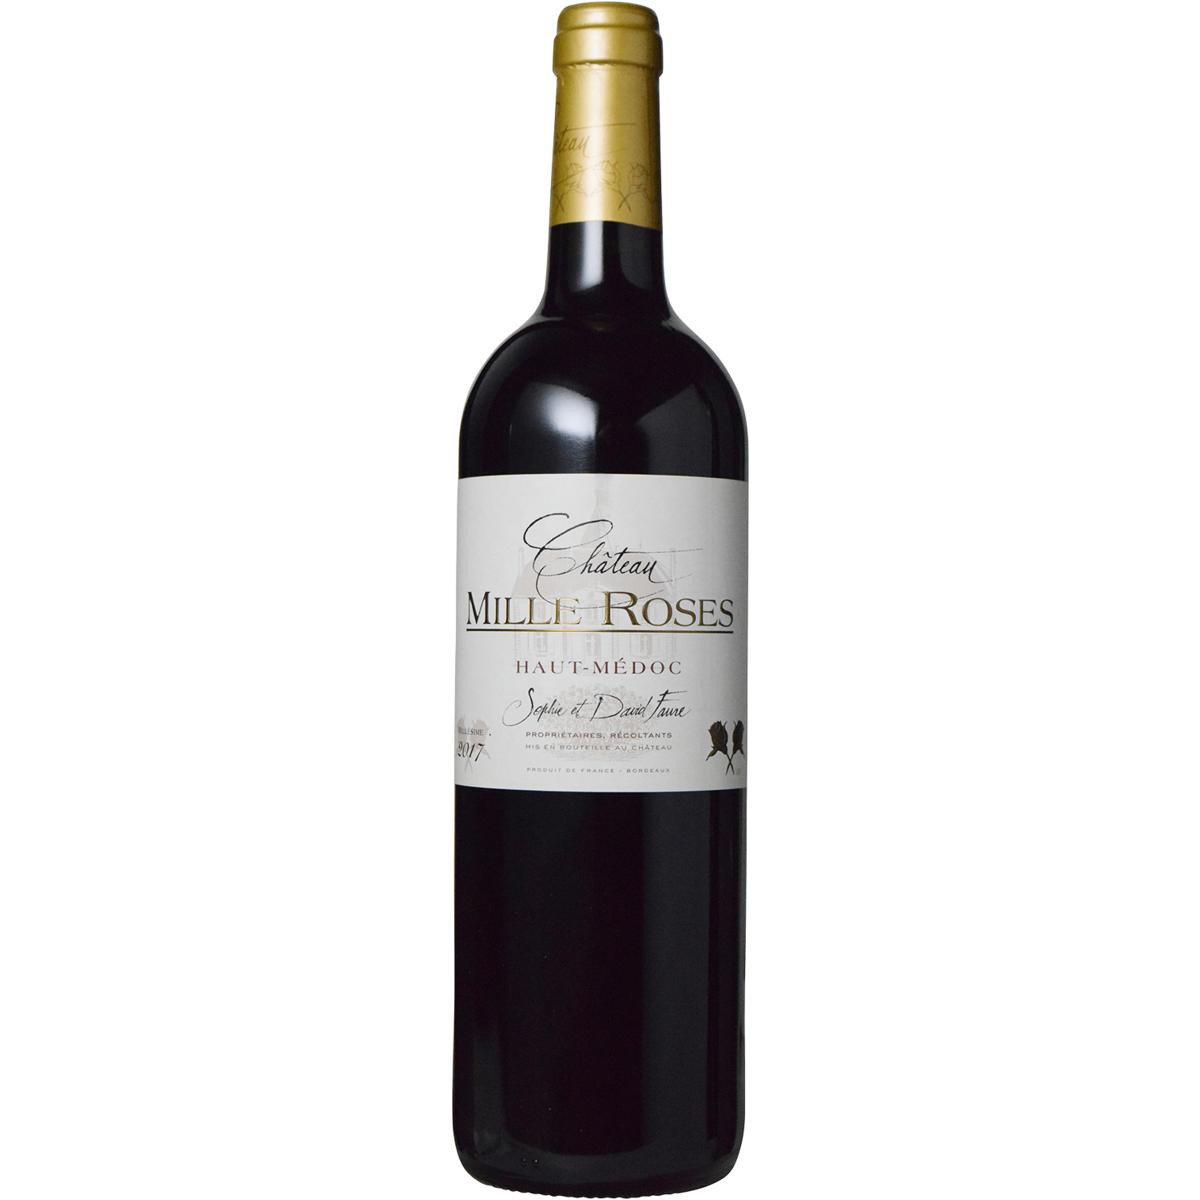 Chateau Mille Roses Haut Medoc